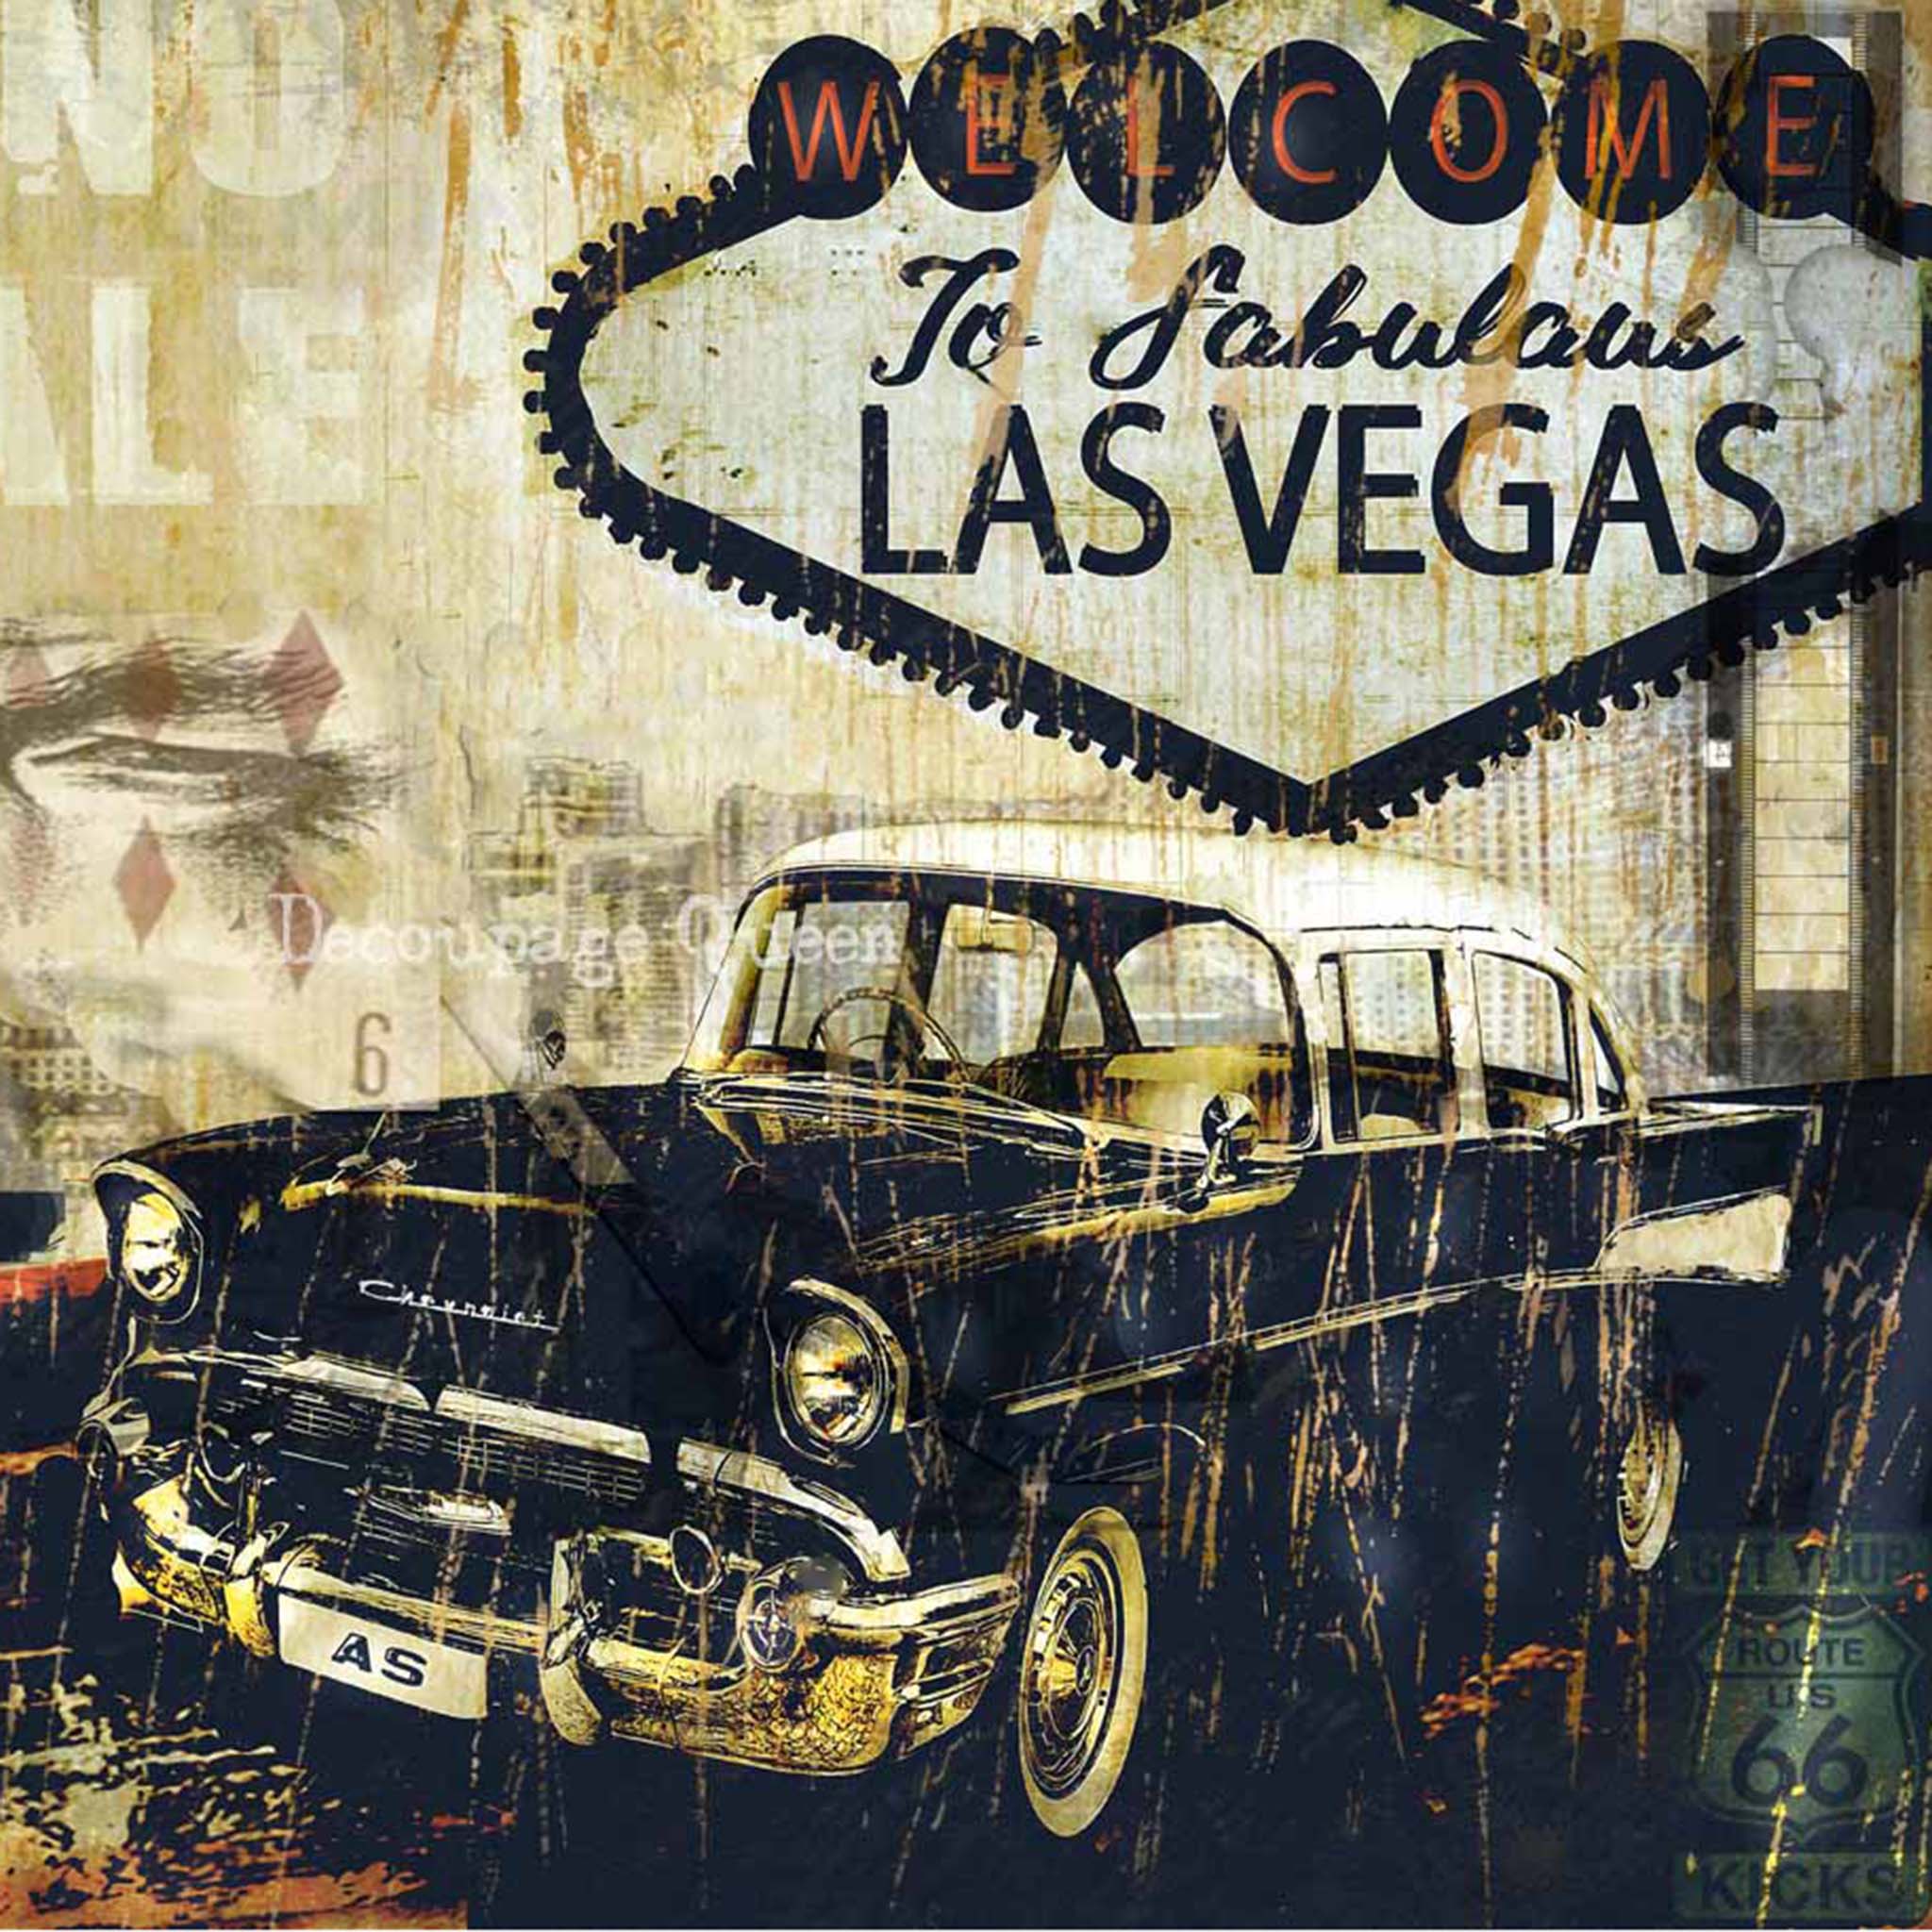 Close-up of a rice paper design featuring the iconic Welcome to Las Vegas sign above an antique car.